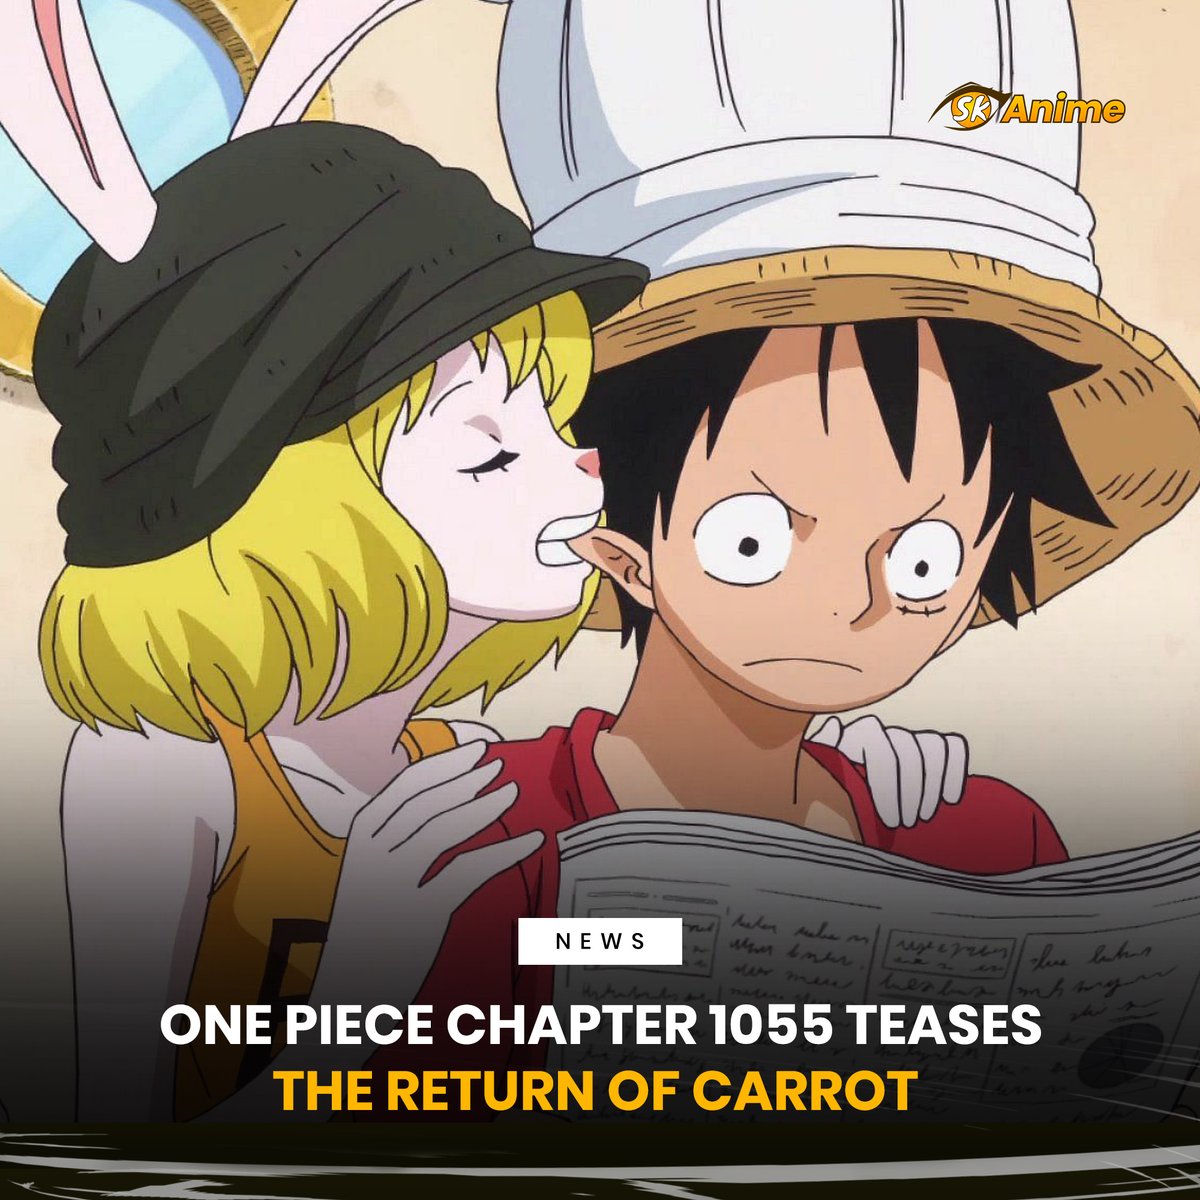 Sportskeeda Anime on X Chapter 1055 of One Piece teases the return of  fans favorite Carrot Follow us for more Anime news and updates  httpstcoD35jolYodp Checkout   ONEPIECE1055 ONEPIECEDAY ONEPIECE  carrot 